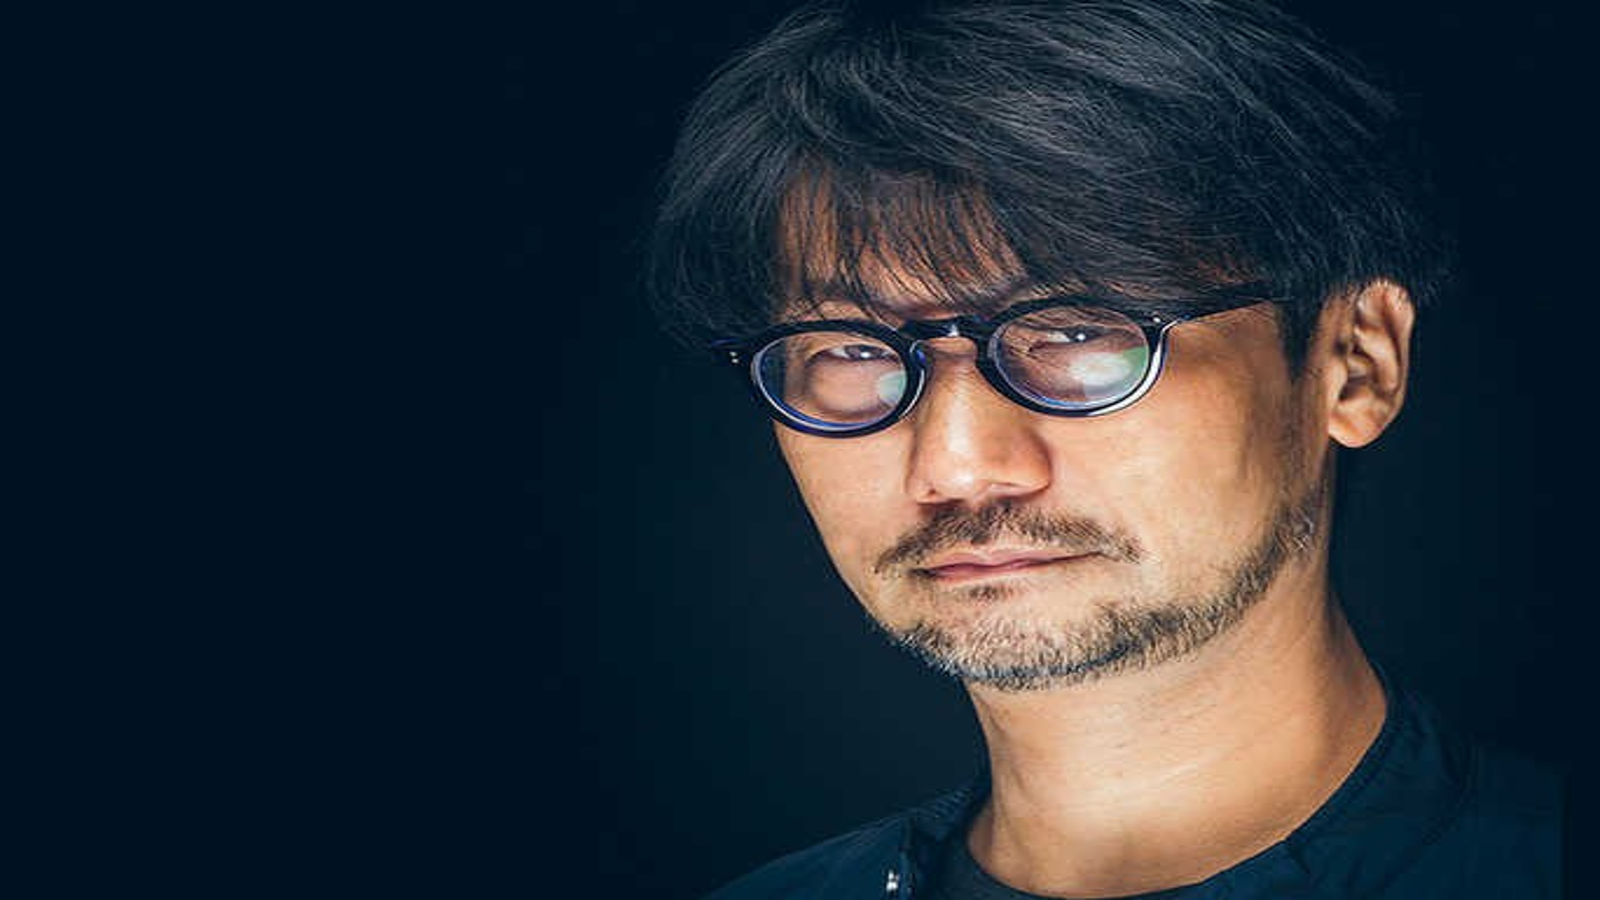 Hideo Kojima Talks About What He'd Like to Create in 2020